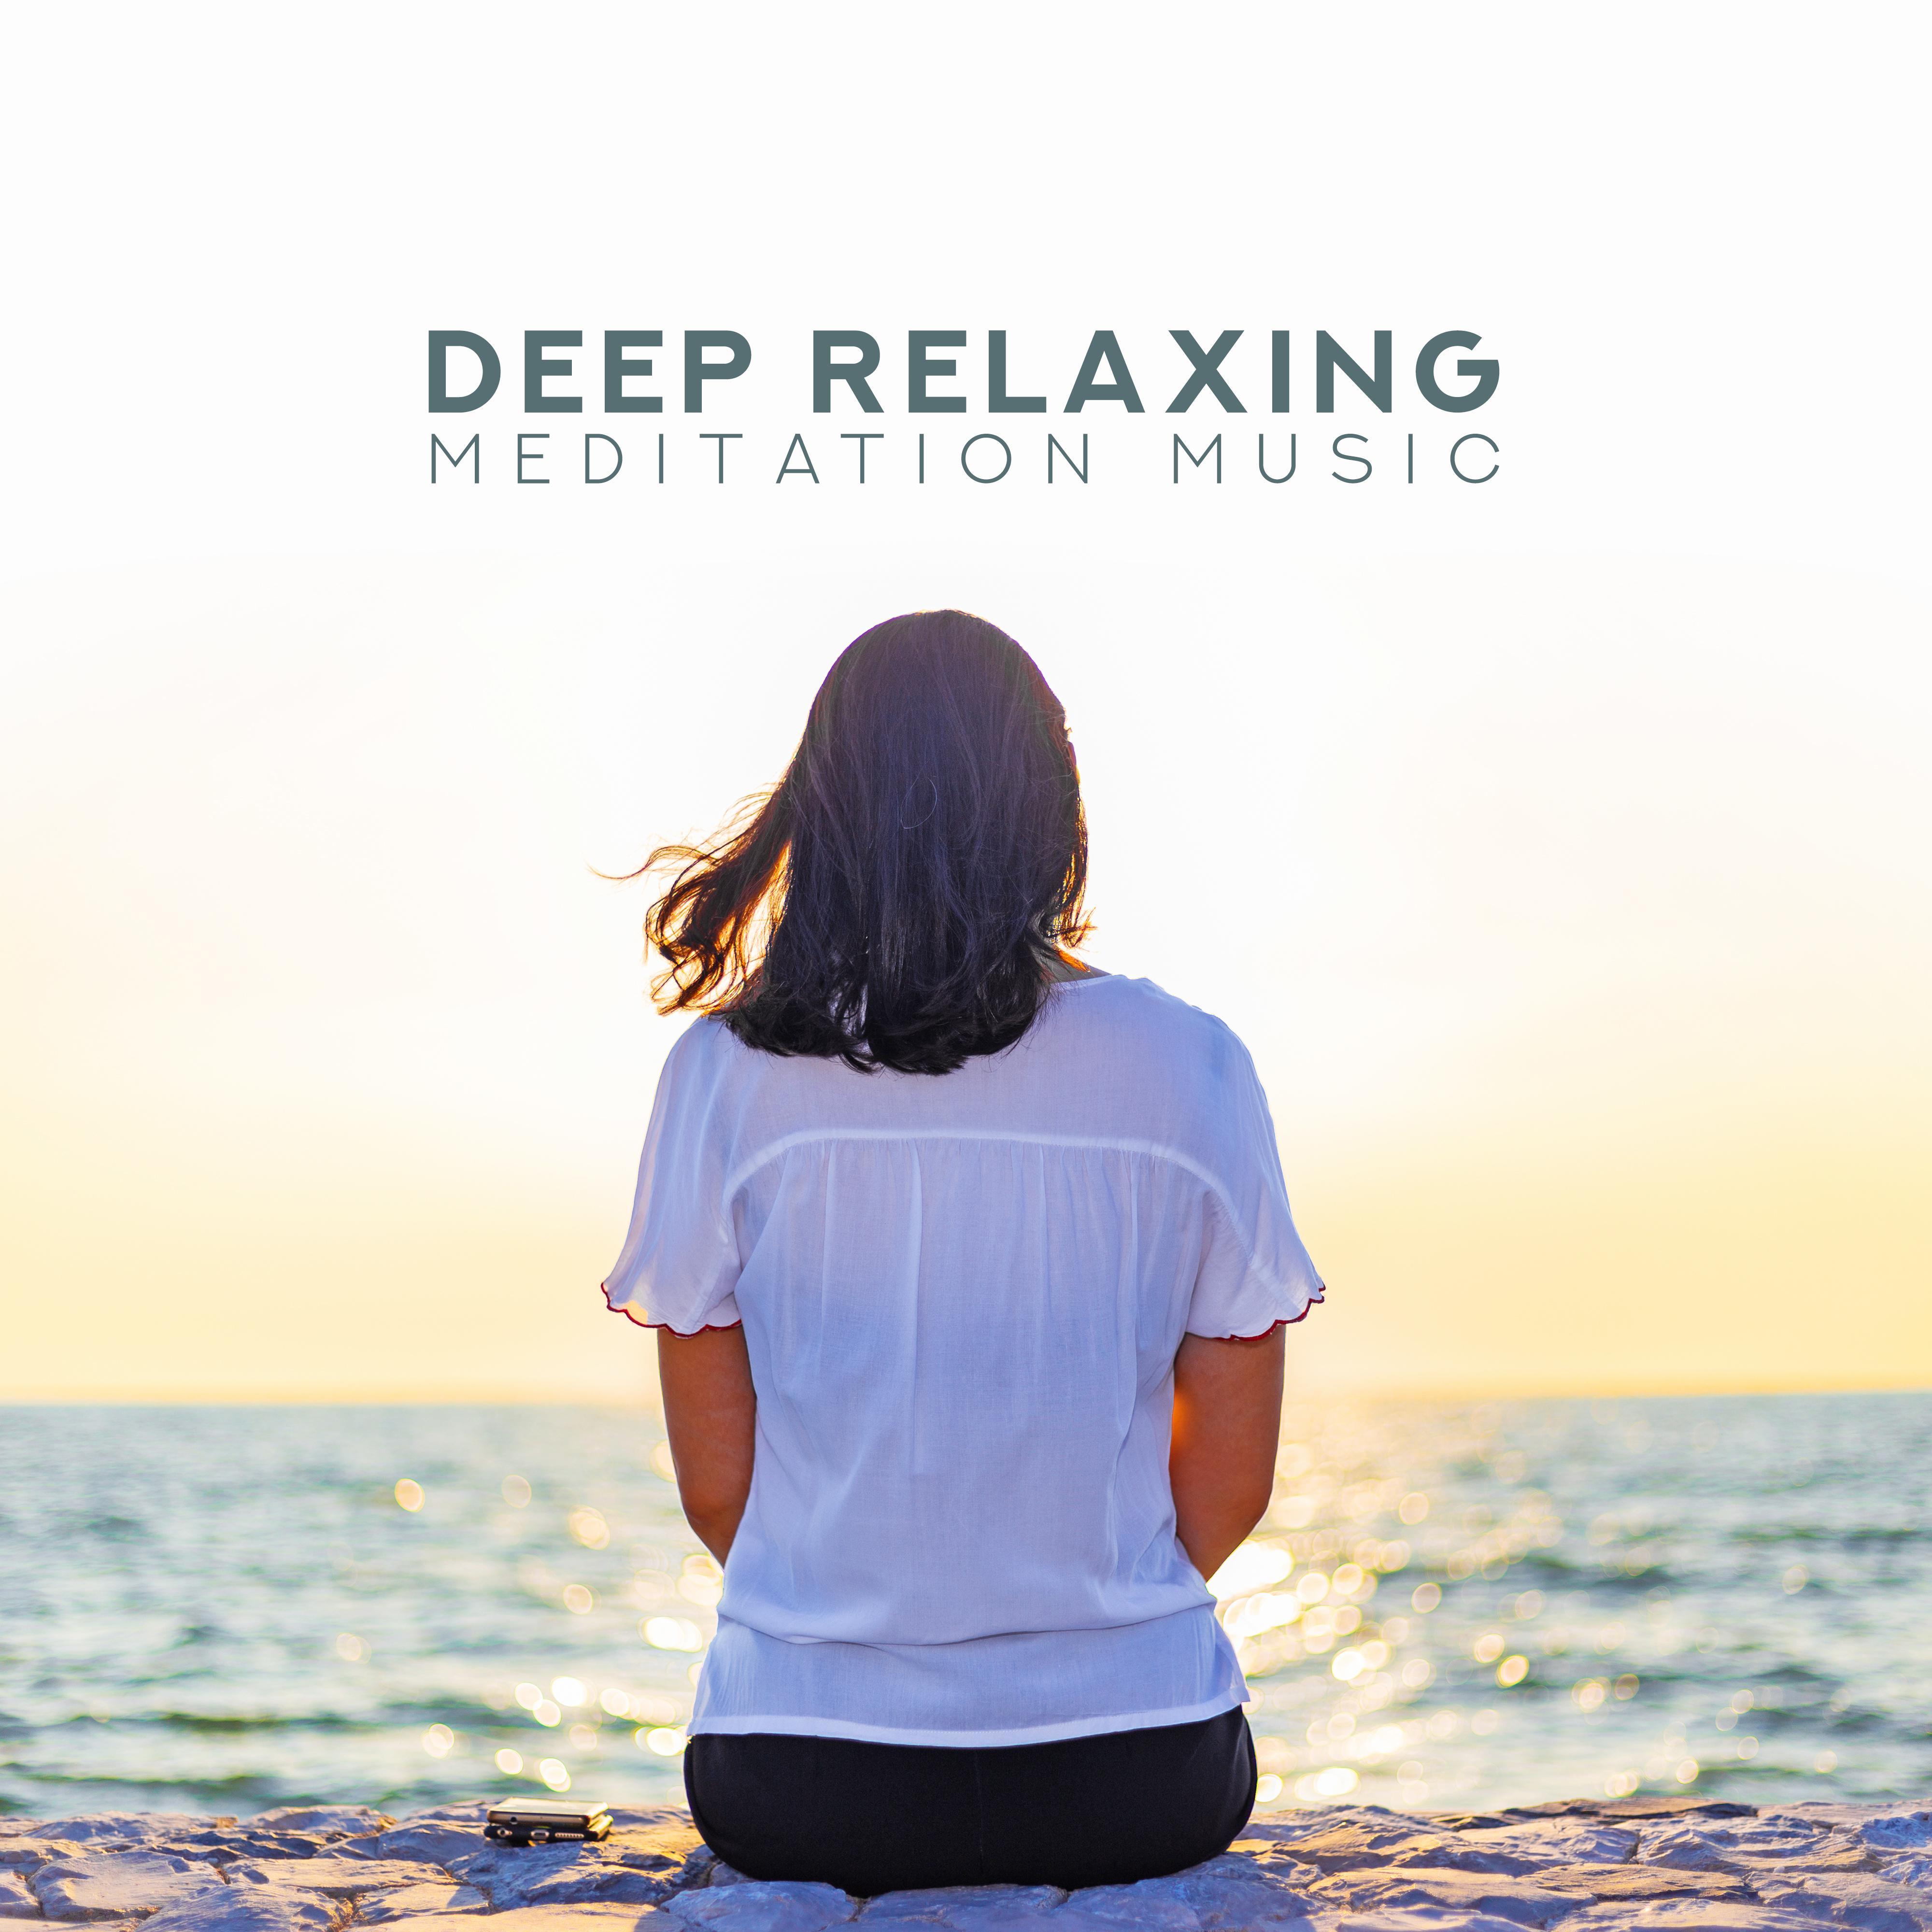 Deep Relaxing Meditation Music  Meditation Music Zone, Pure Therapy, Ambient Yoga, Deep Harmony, Music for Mind, Yoga Meditation